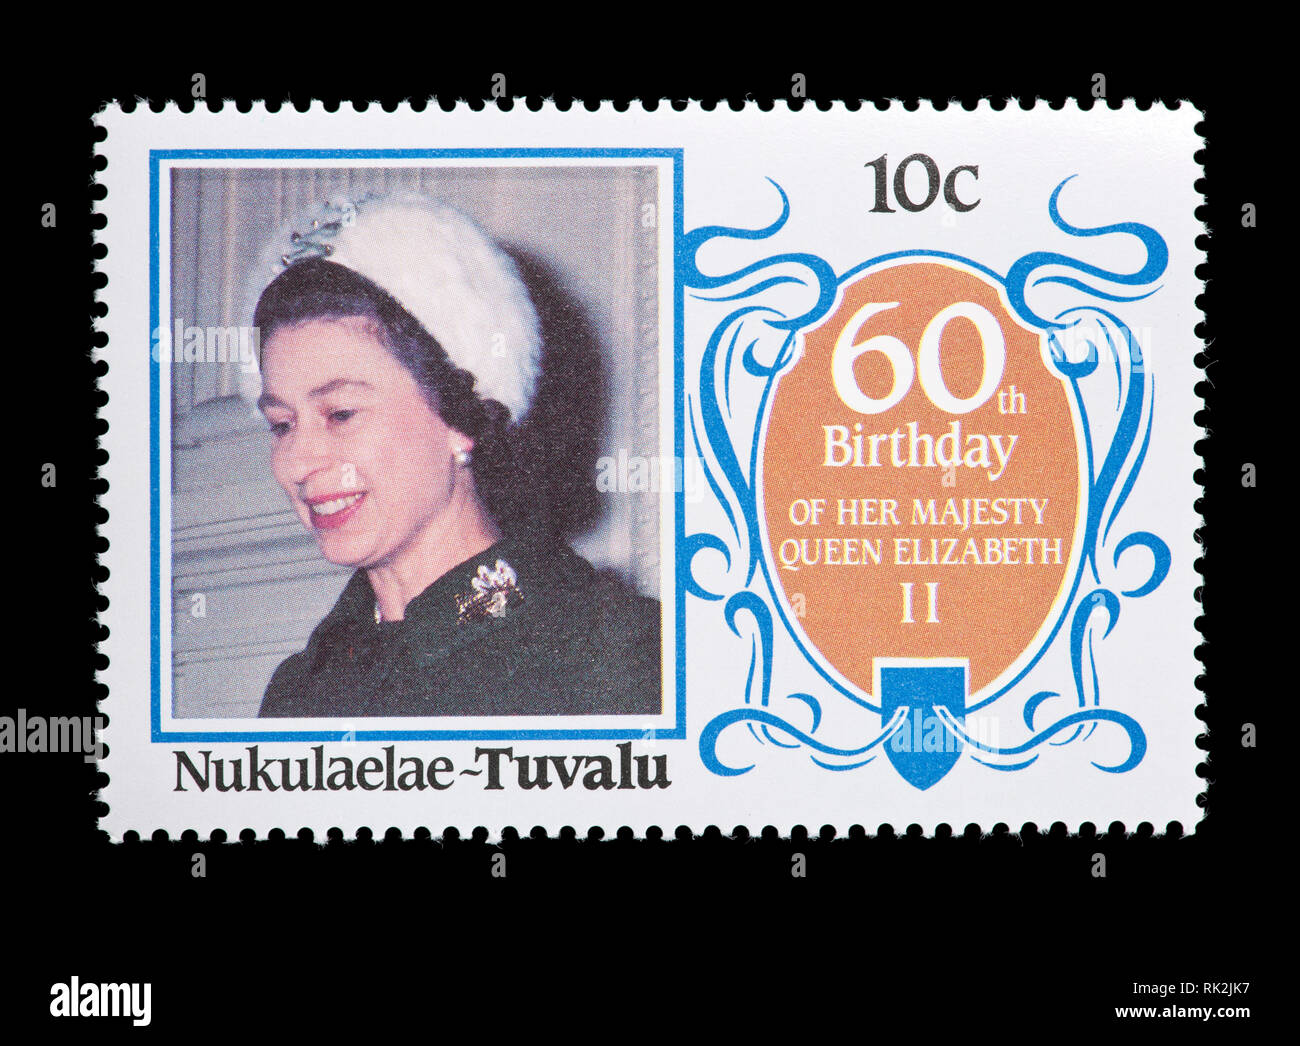 Postage stamp from Nukulaelae, Tuvalu depicting Queen Elizabeth II of Great Britain, for her 50th birthday. Stock Photo